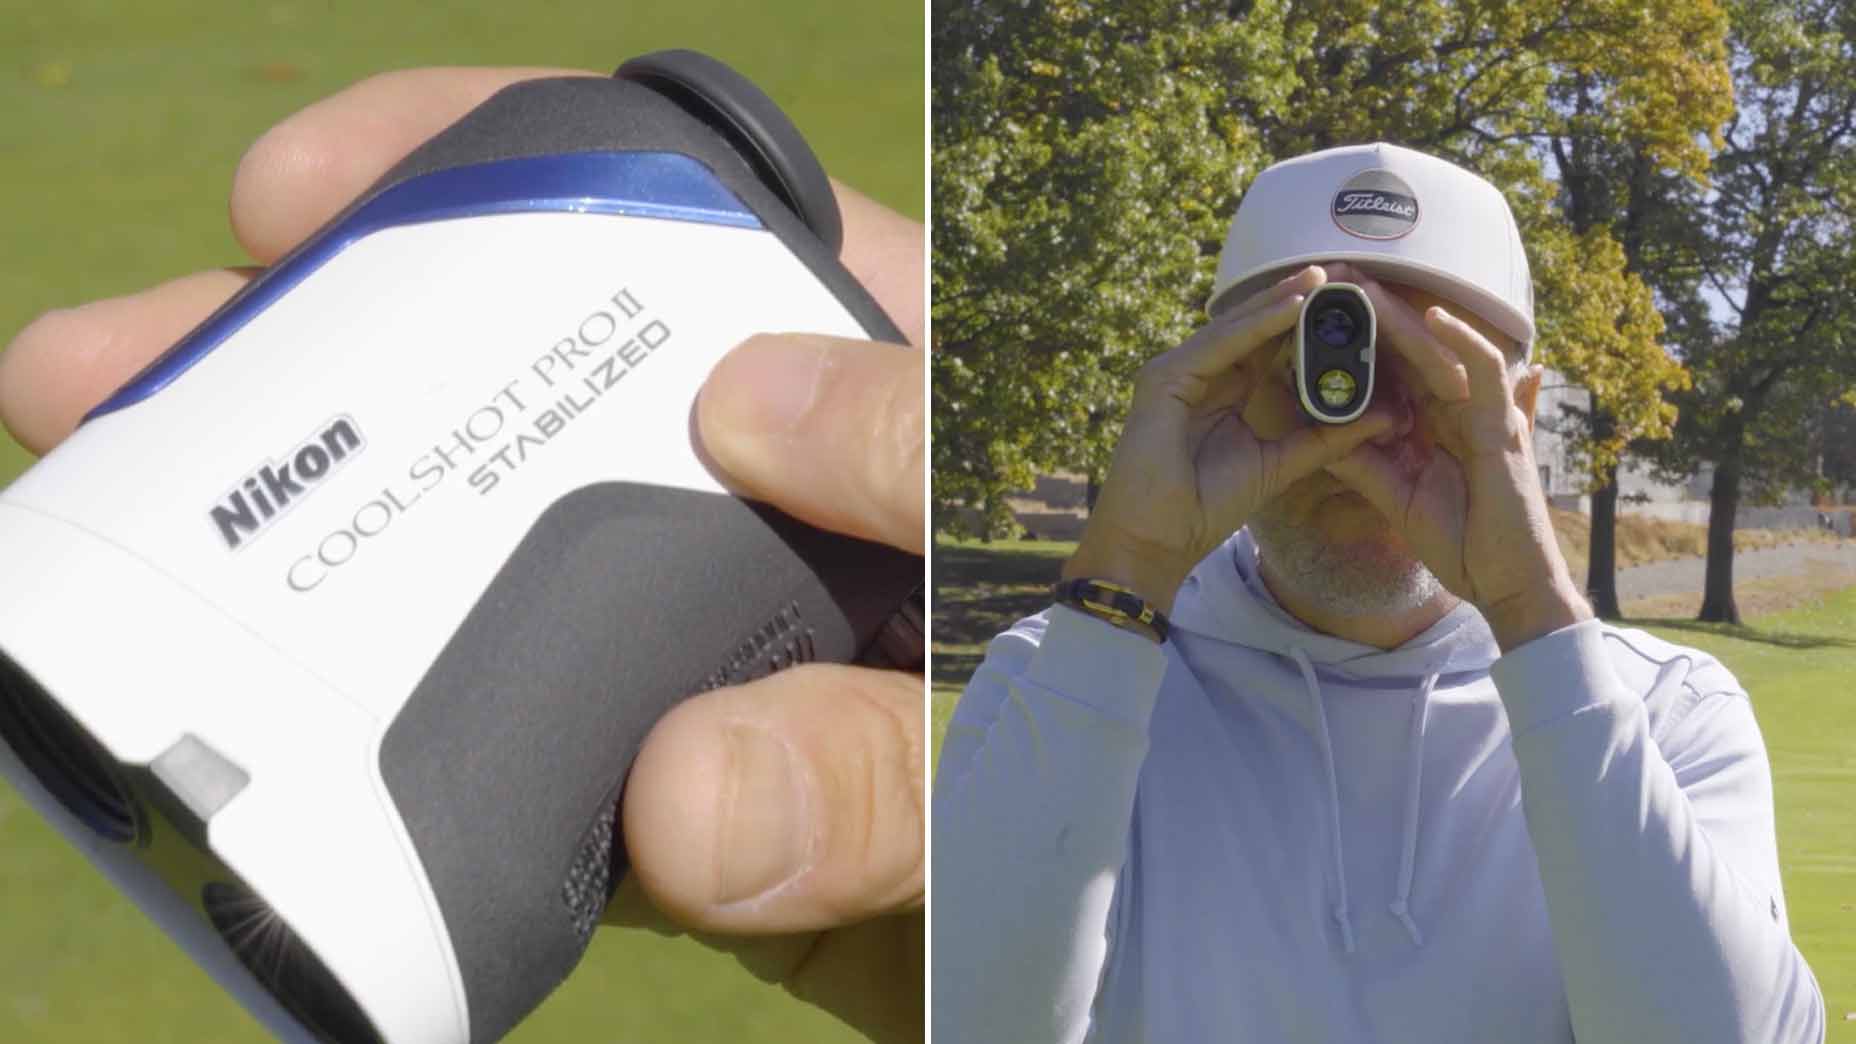 GOLF Top 100 Teacher Jonathan Yarwood holds nikon rangefinder and demonstrates how to use it